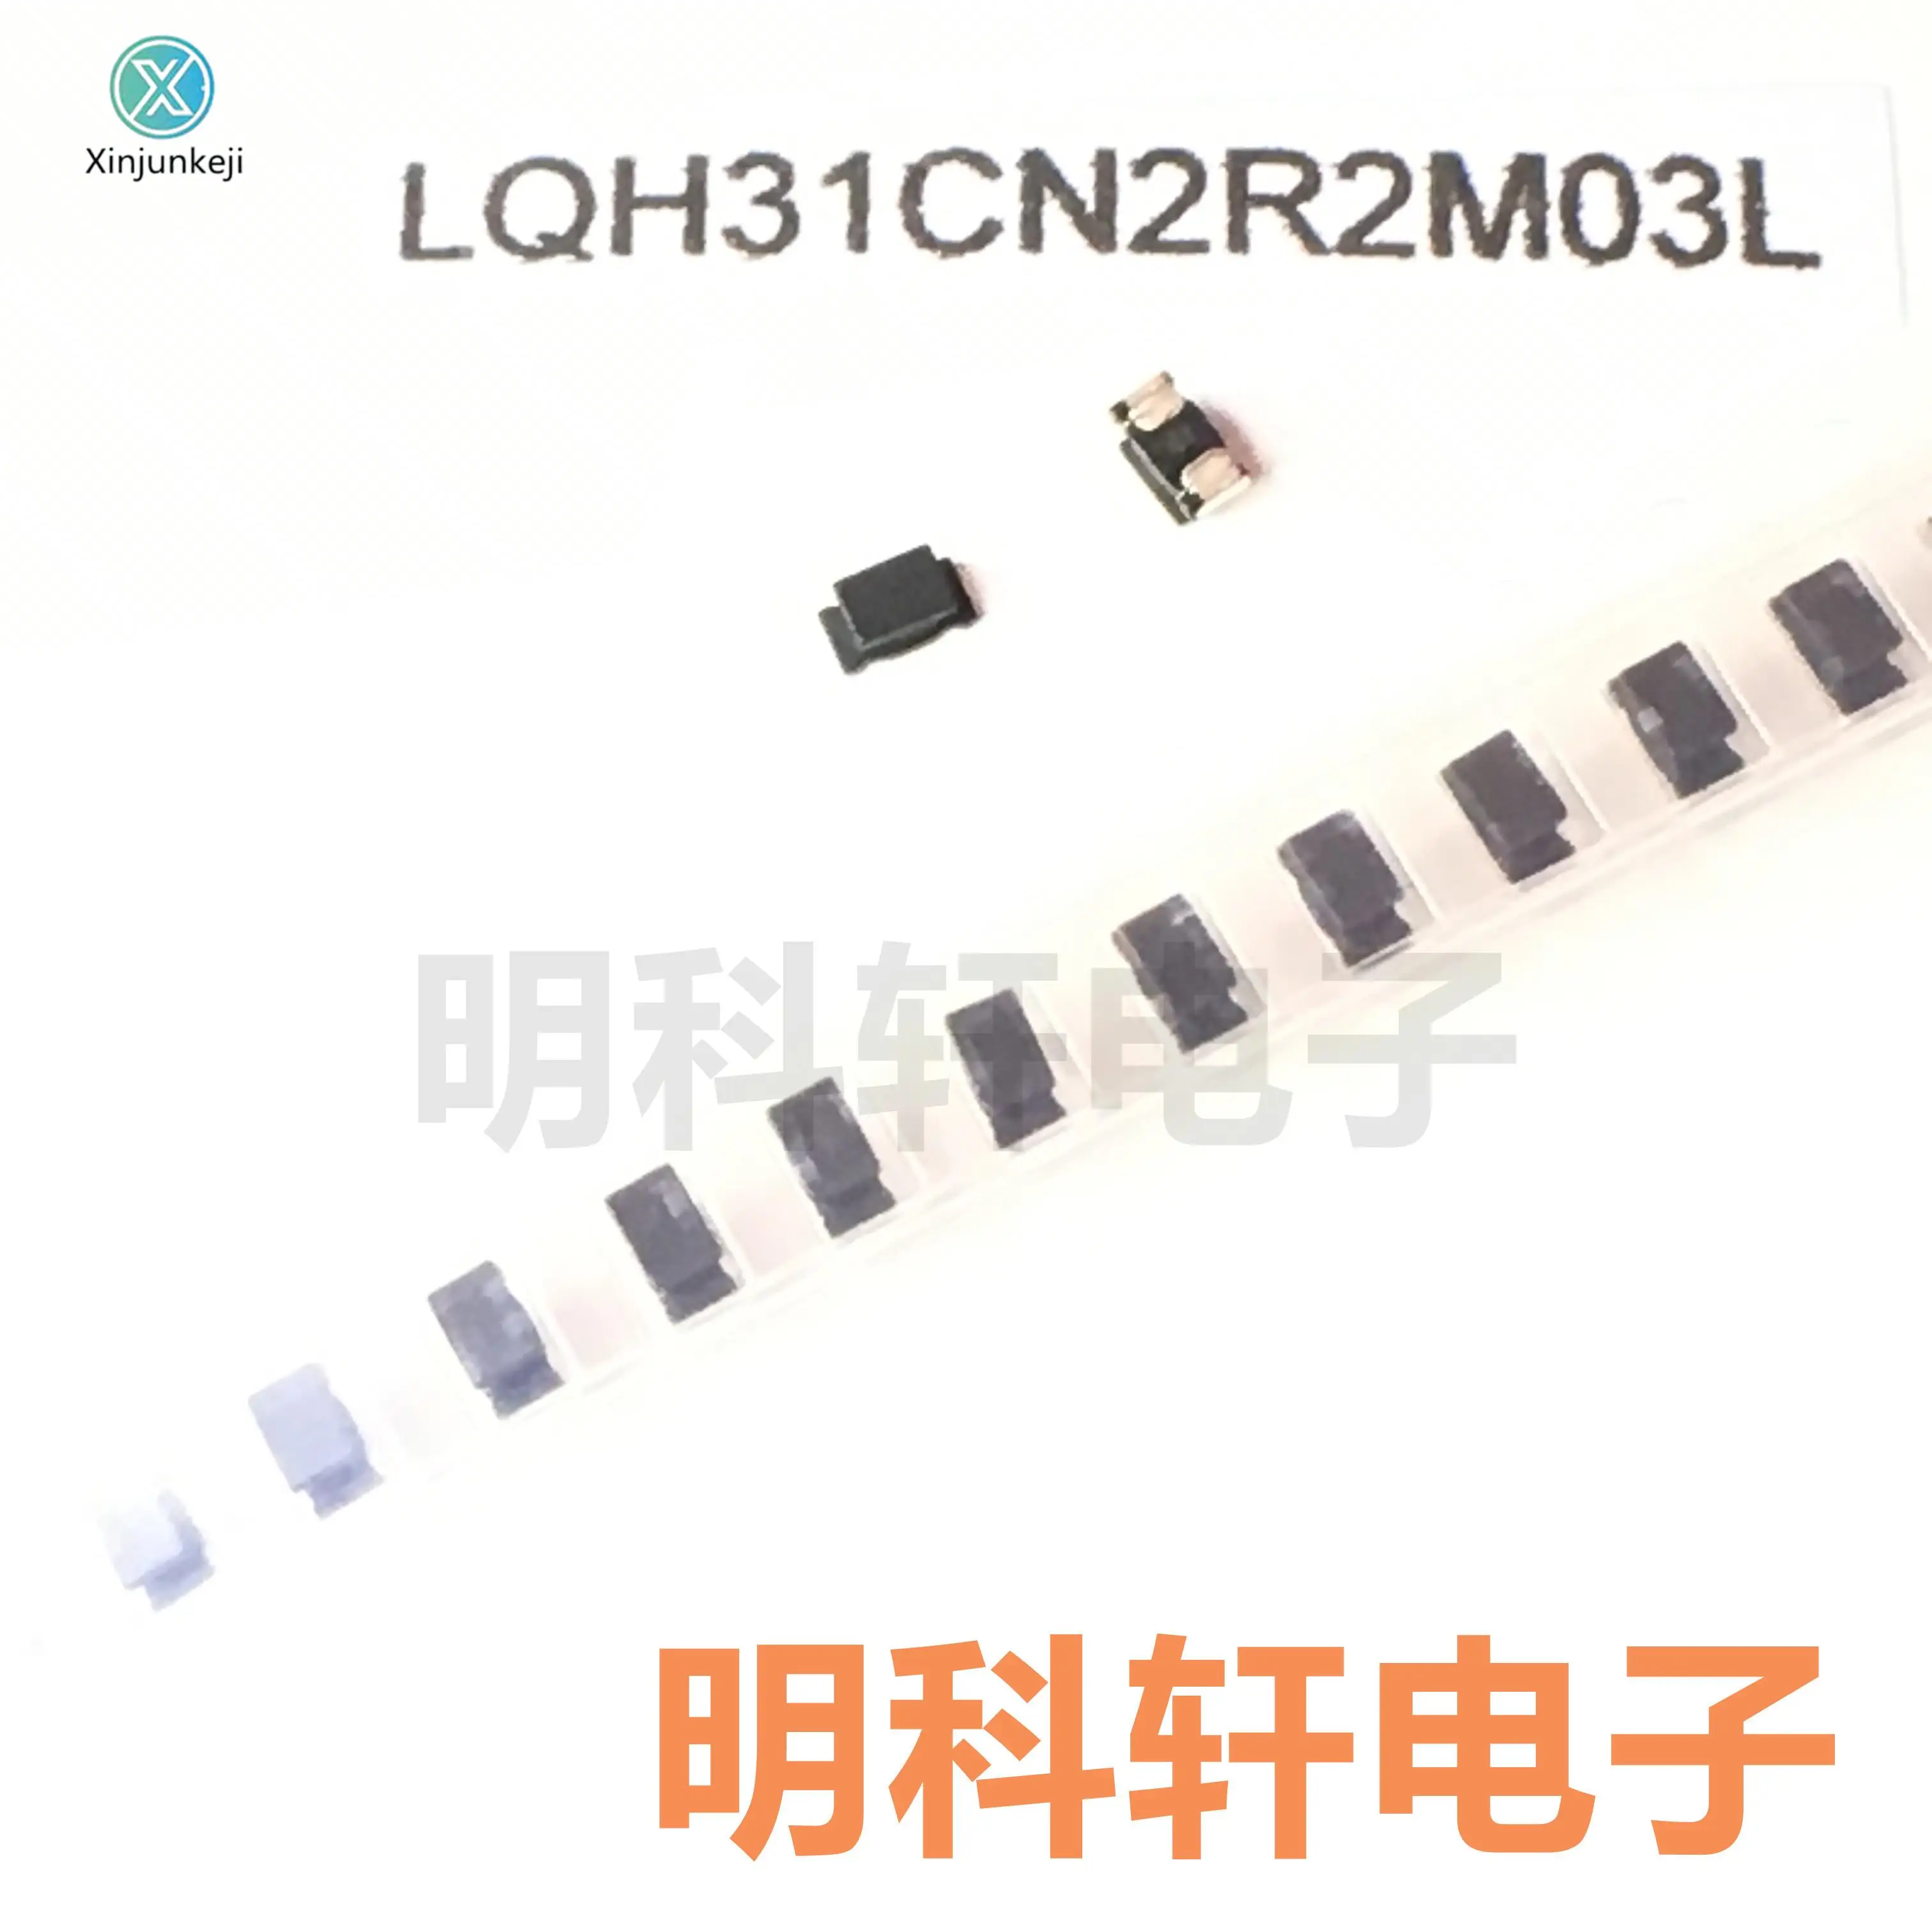 

20pcs orginal new LQH31CN2R2M03L SMD Wound Power Inductor 1206 2.2UH